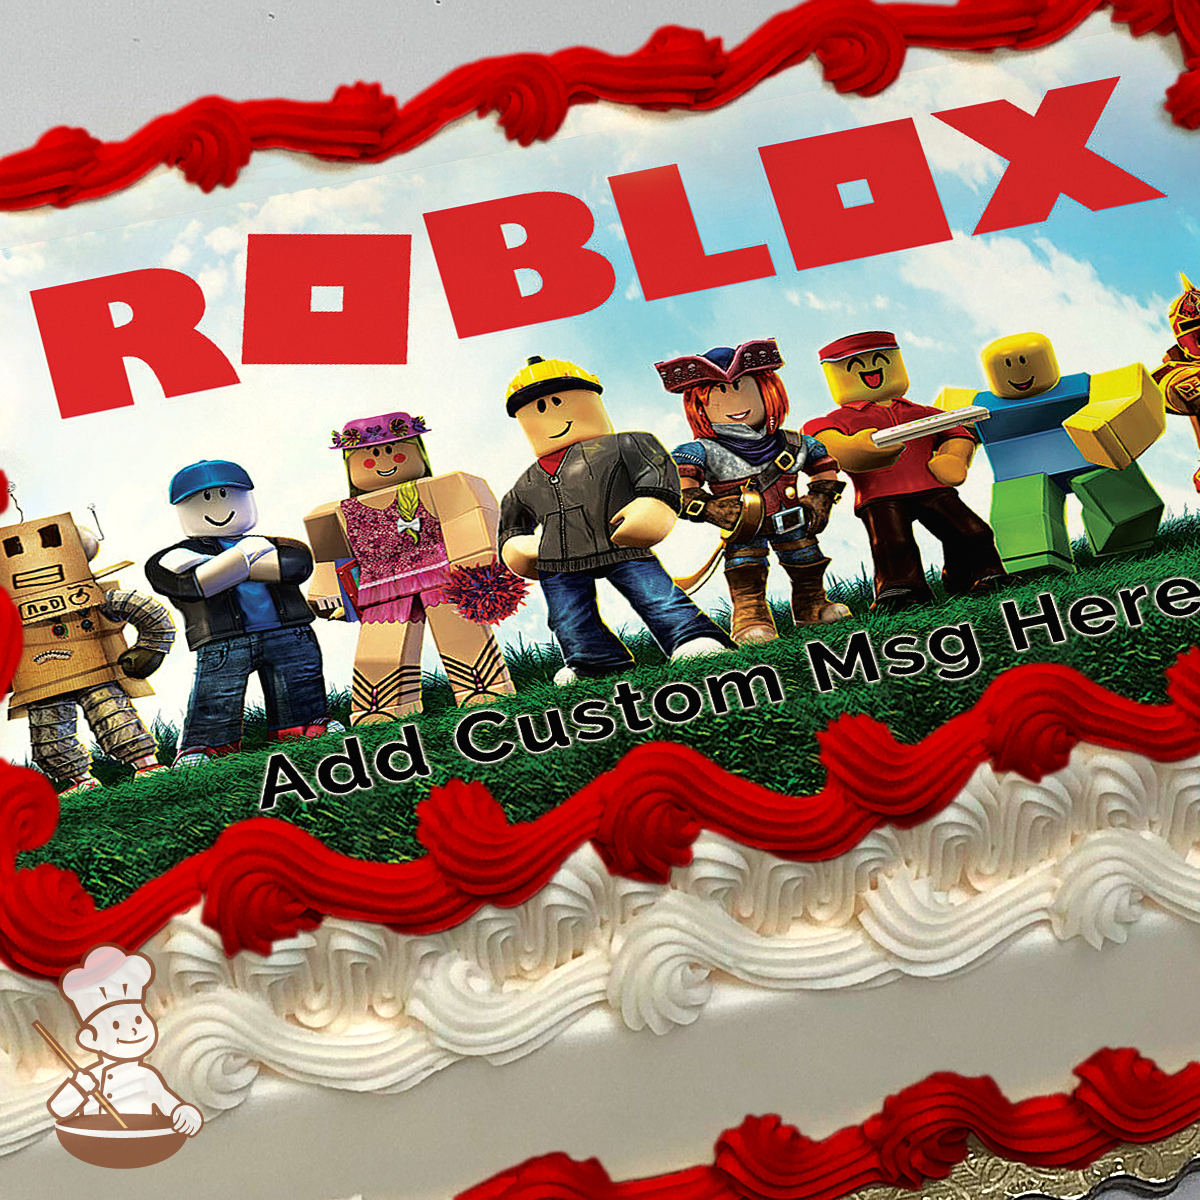 Popular Roblox characters printed on extra cake layer and decorated on rectangle sheet cake.